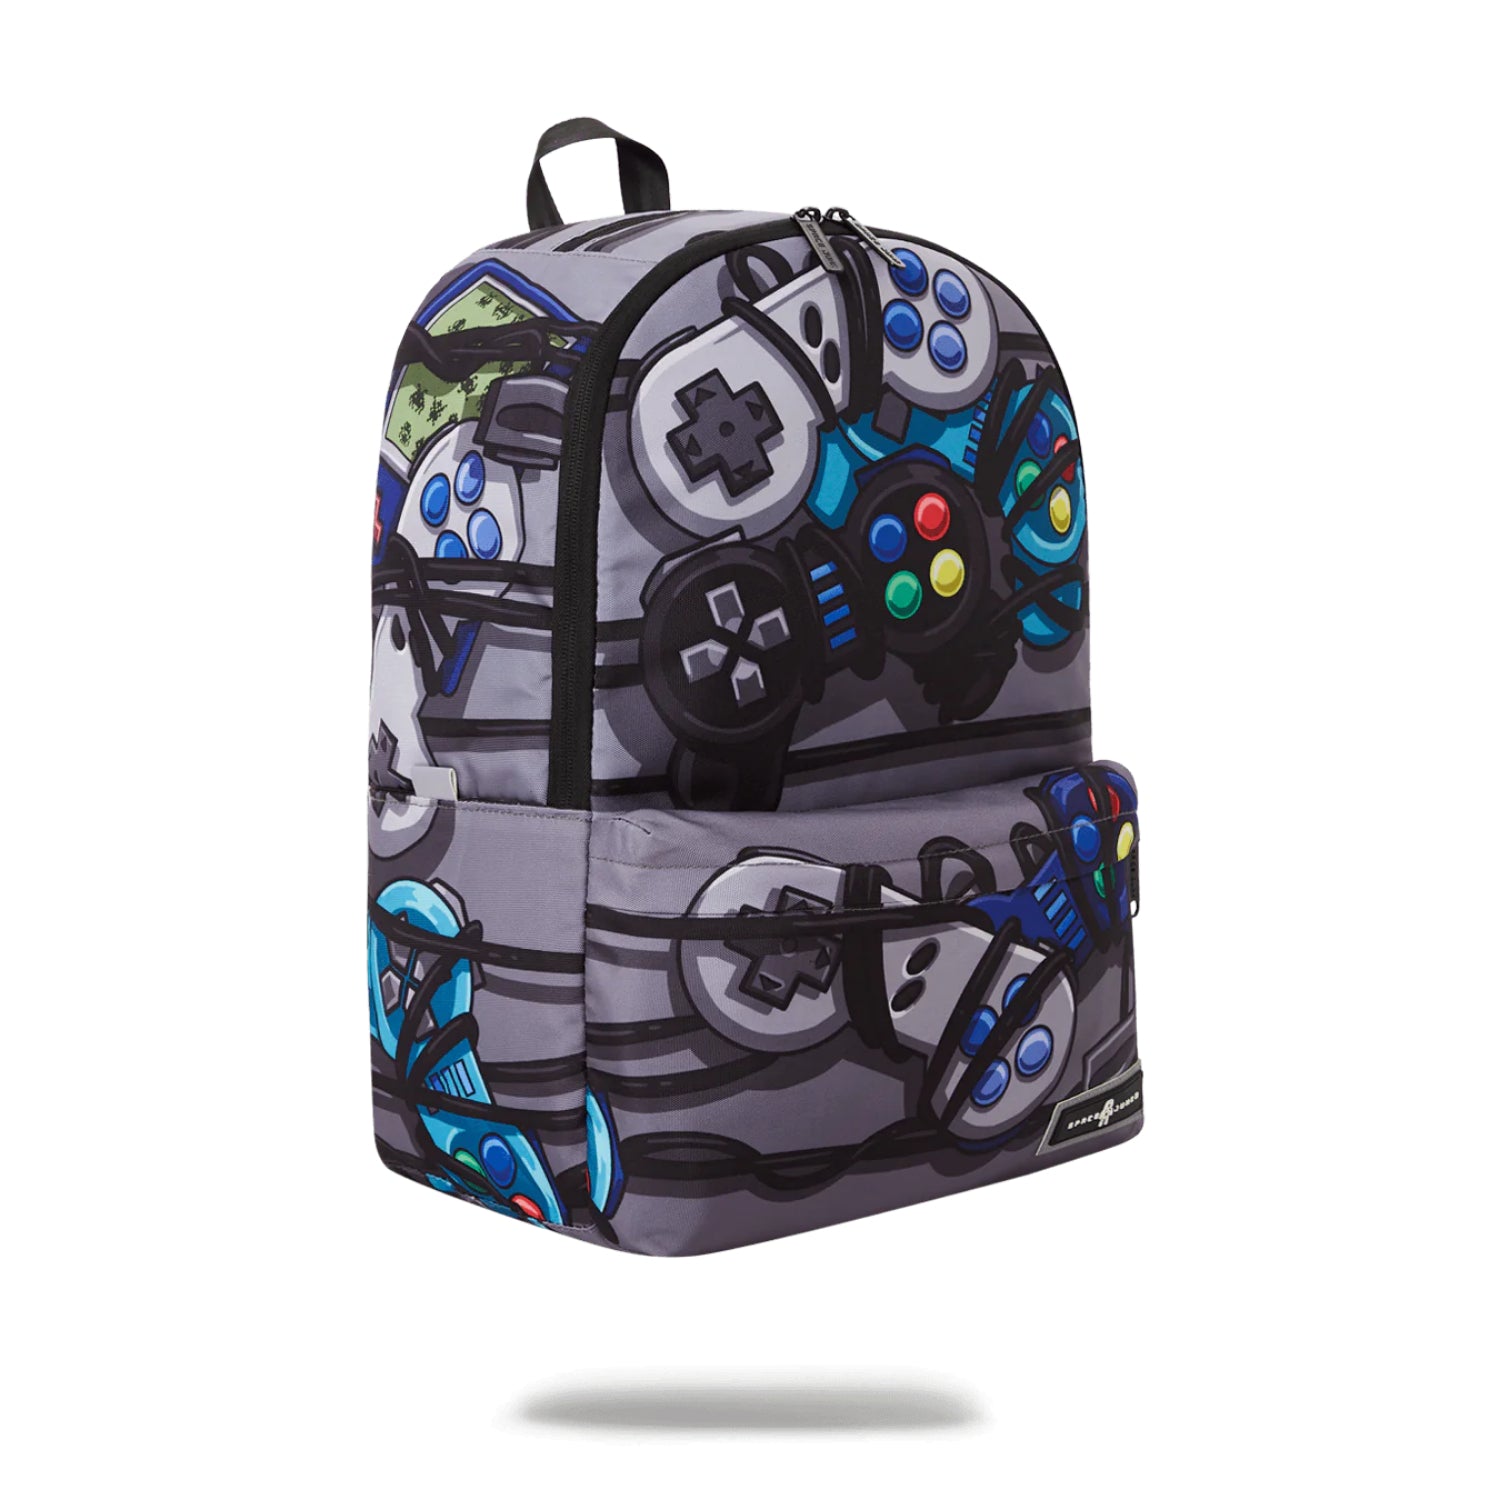 SPACE JUNK Controller Wrap Full Size Backpack